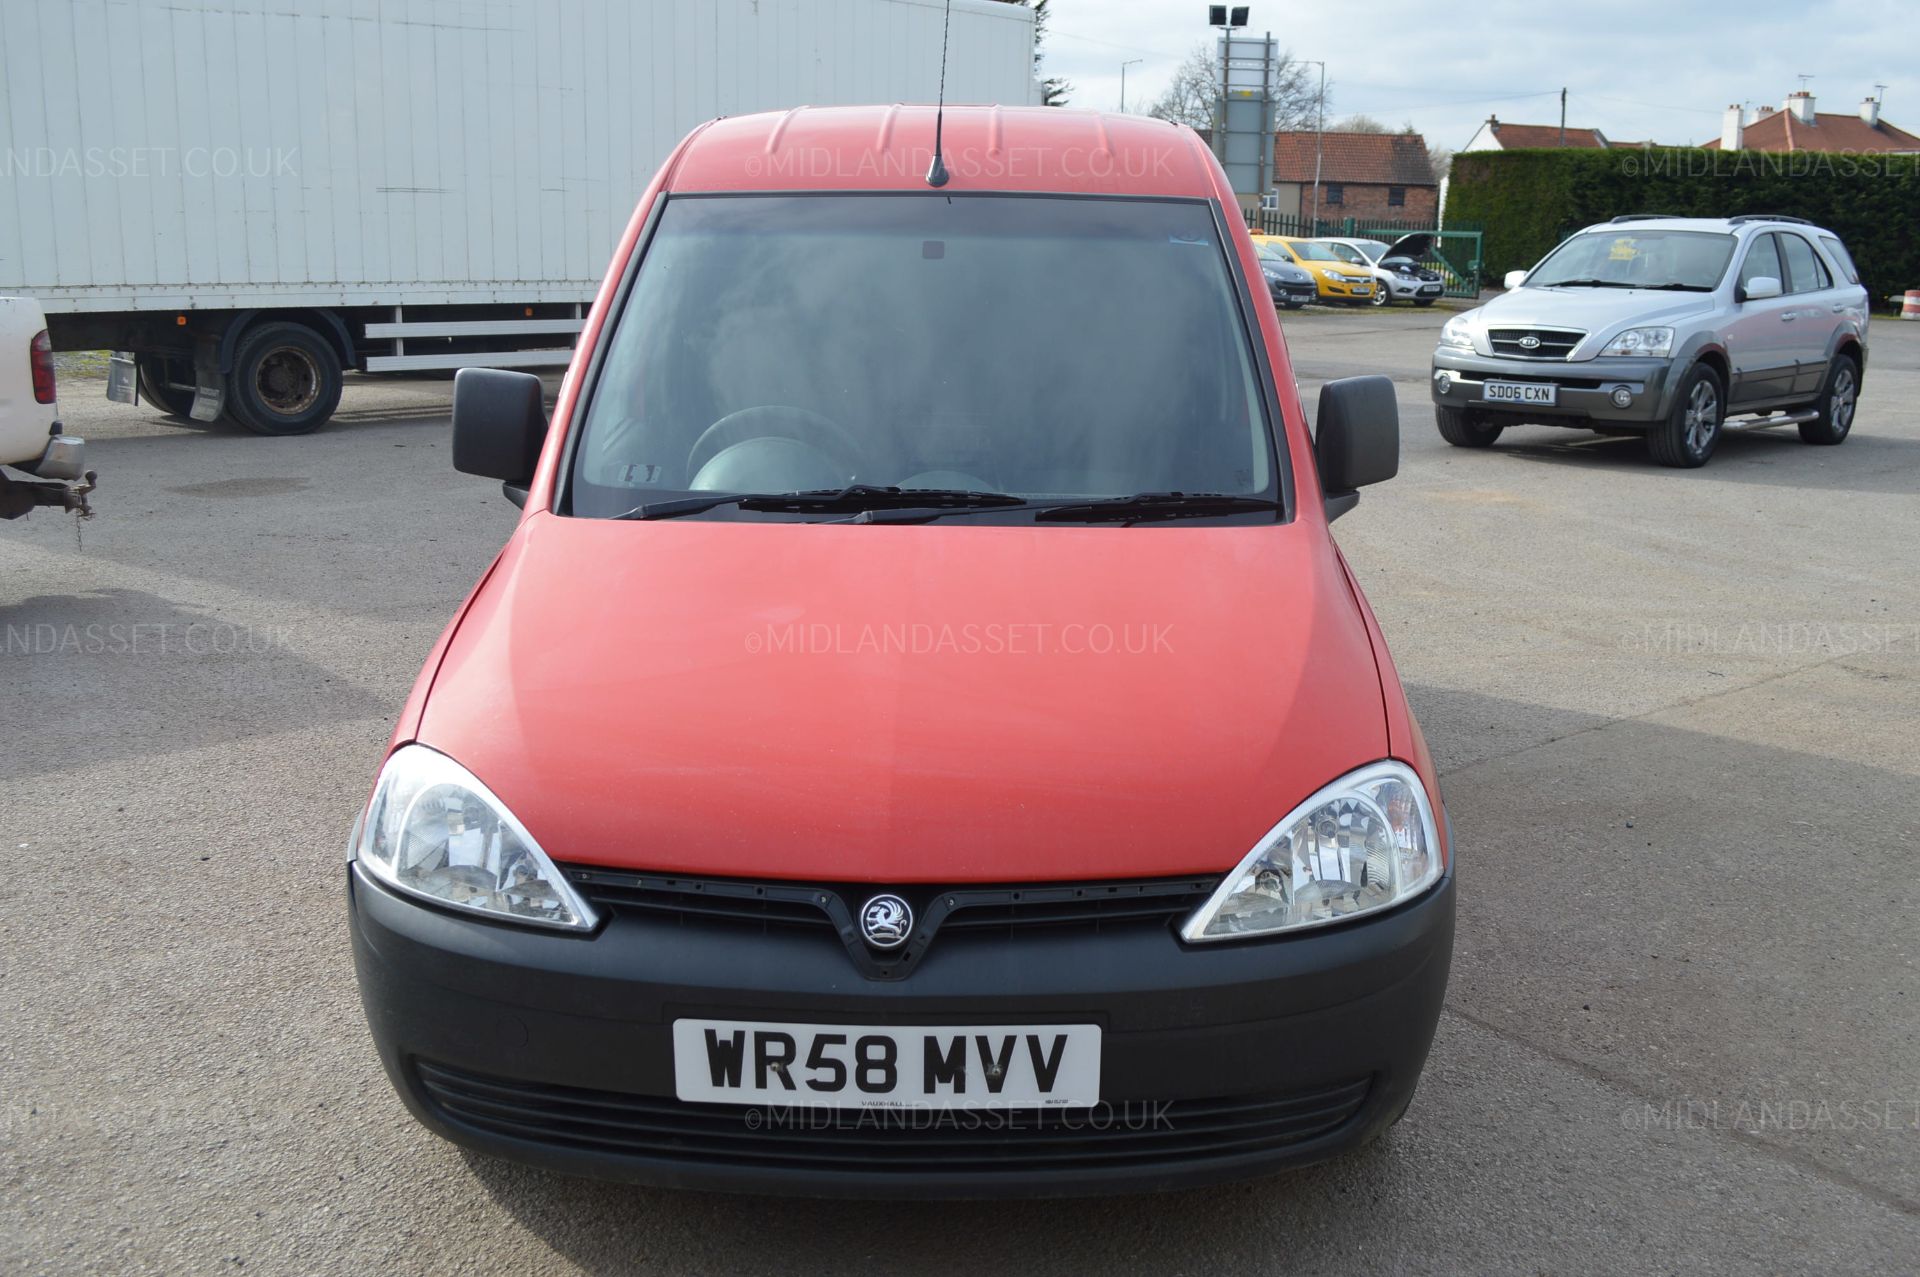 KB - 2008/58 REG VAUXHALL COMBO 1700 CDTI - 1 PREVIOUS OWNER, ROYAL MAIL *NO VAT*   DATE OF - Image 2 of 19